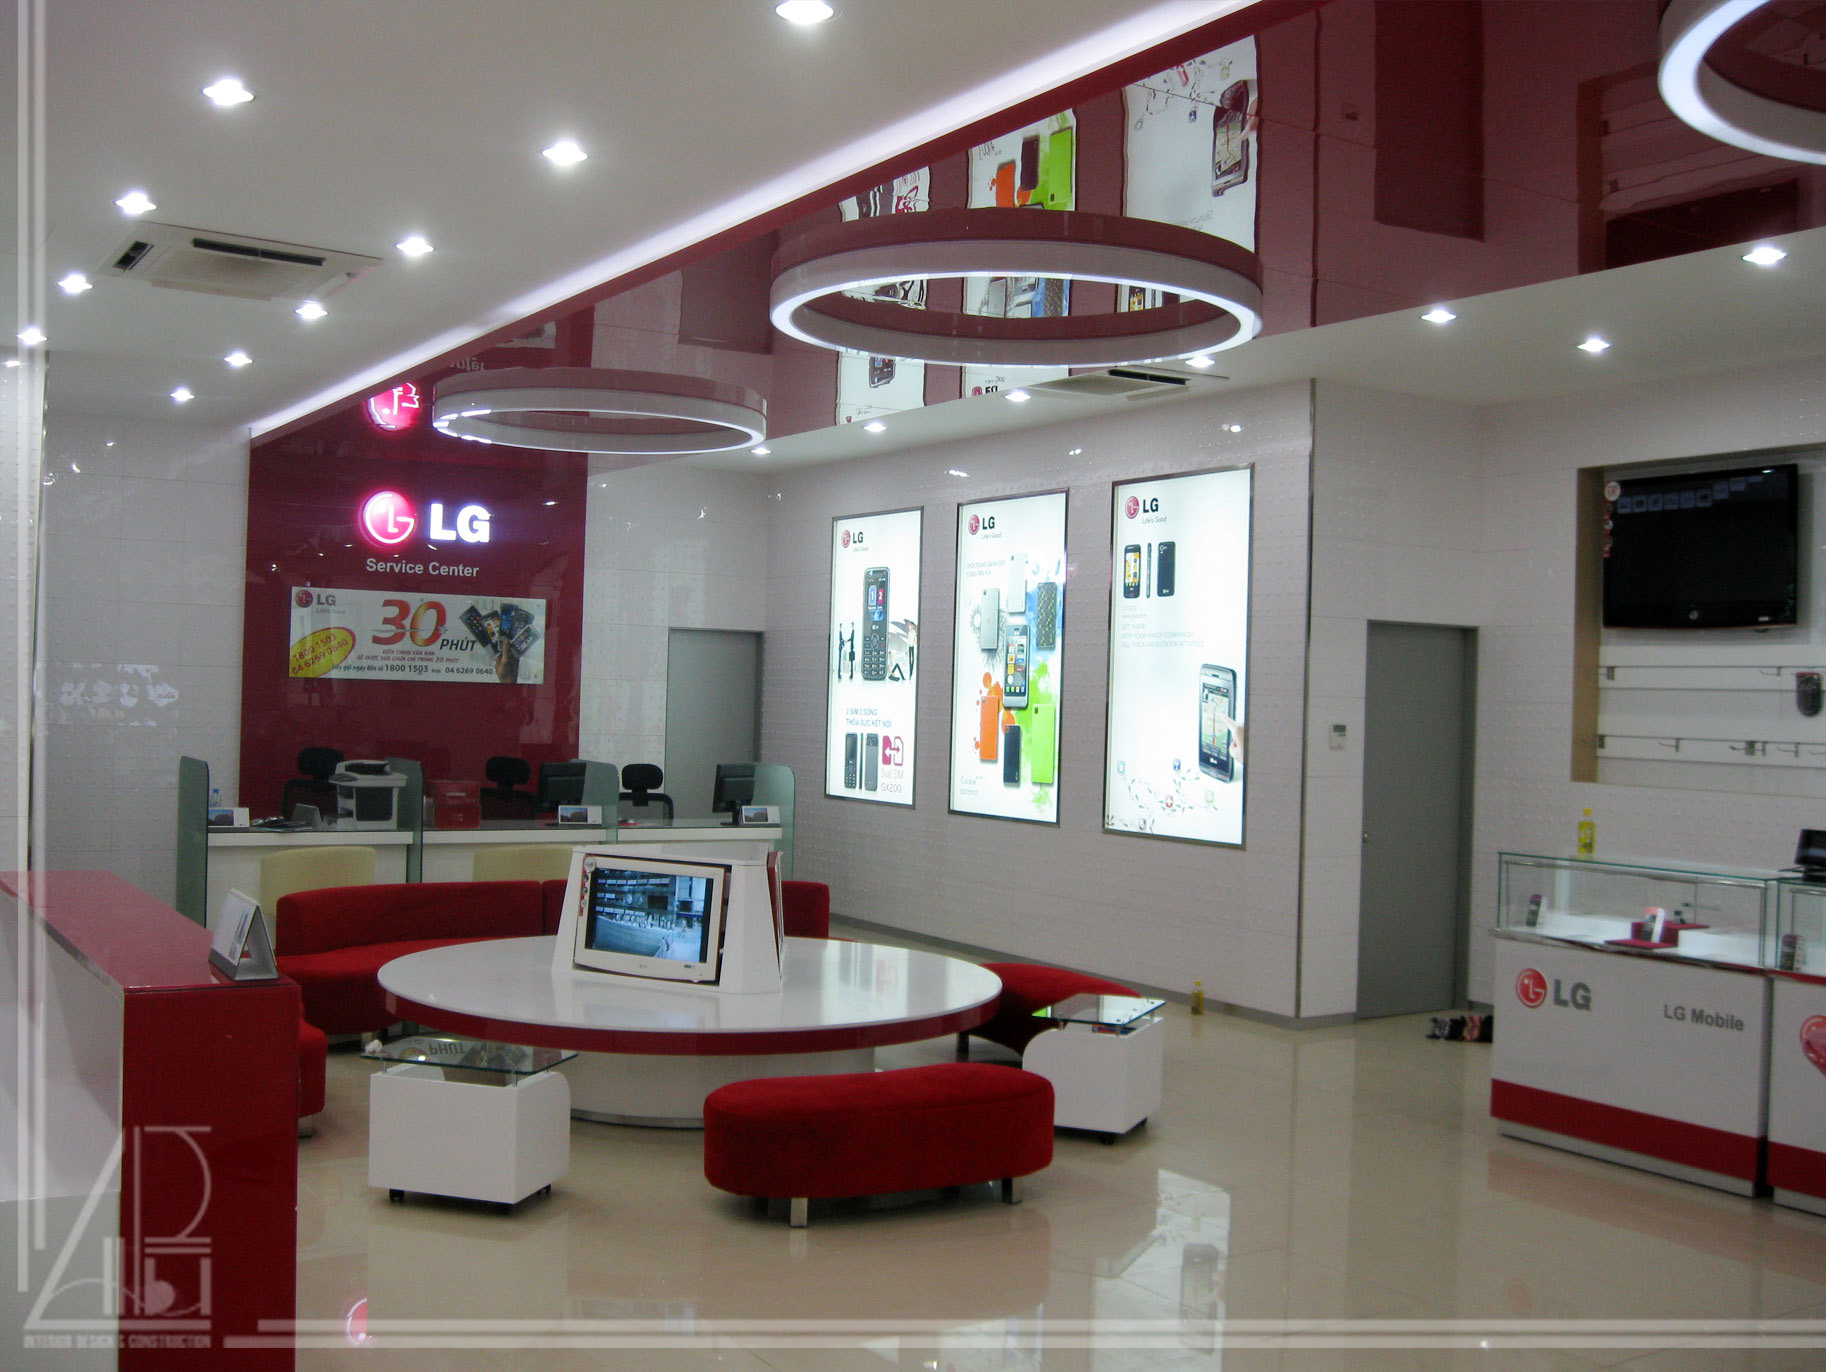 LG TV, Computers, Appliances, Air Conditioners and Mobile Phones